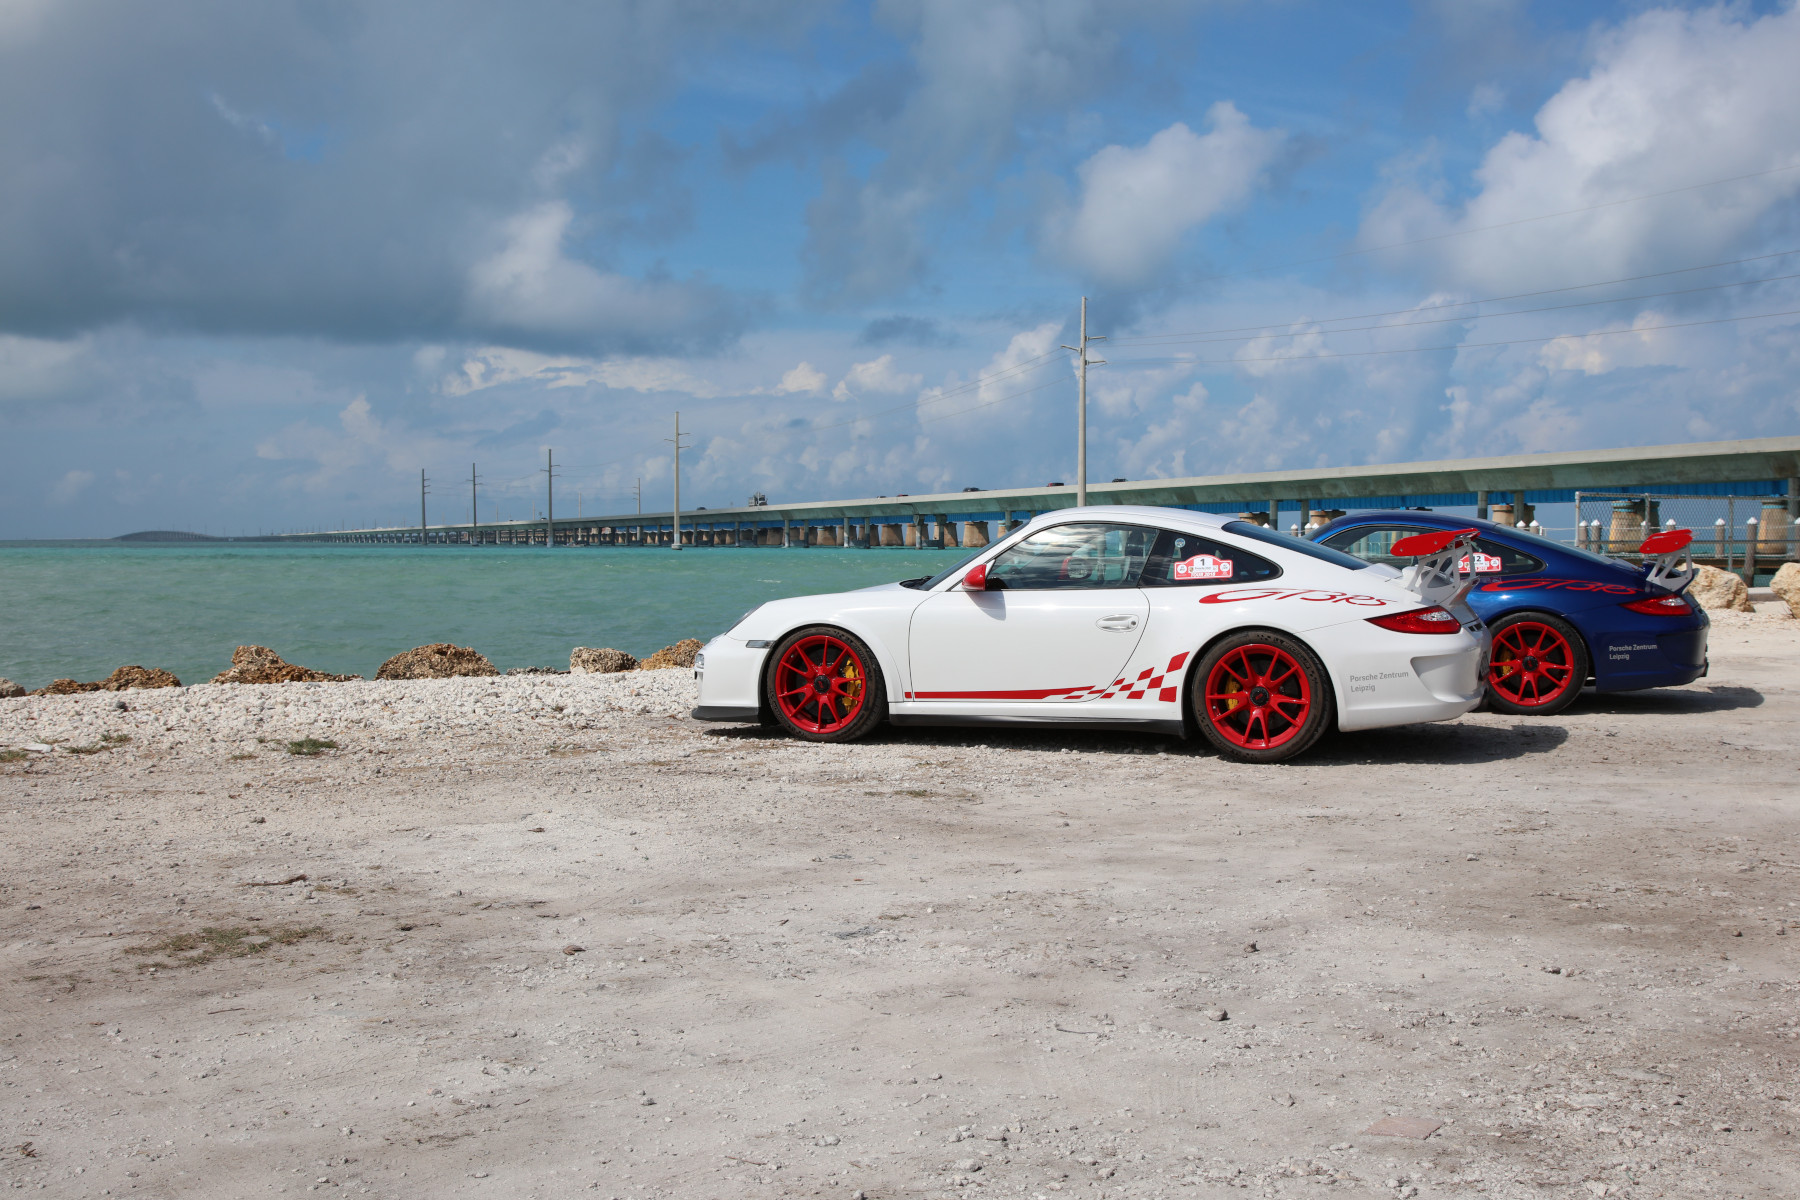 Seven Mile Bridge at the two German 911 GT3 RS